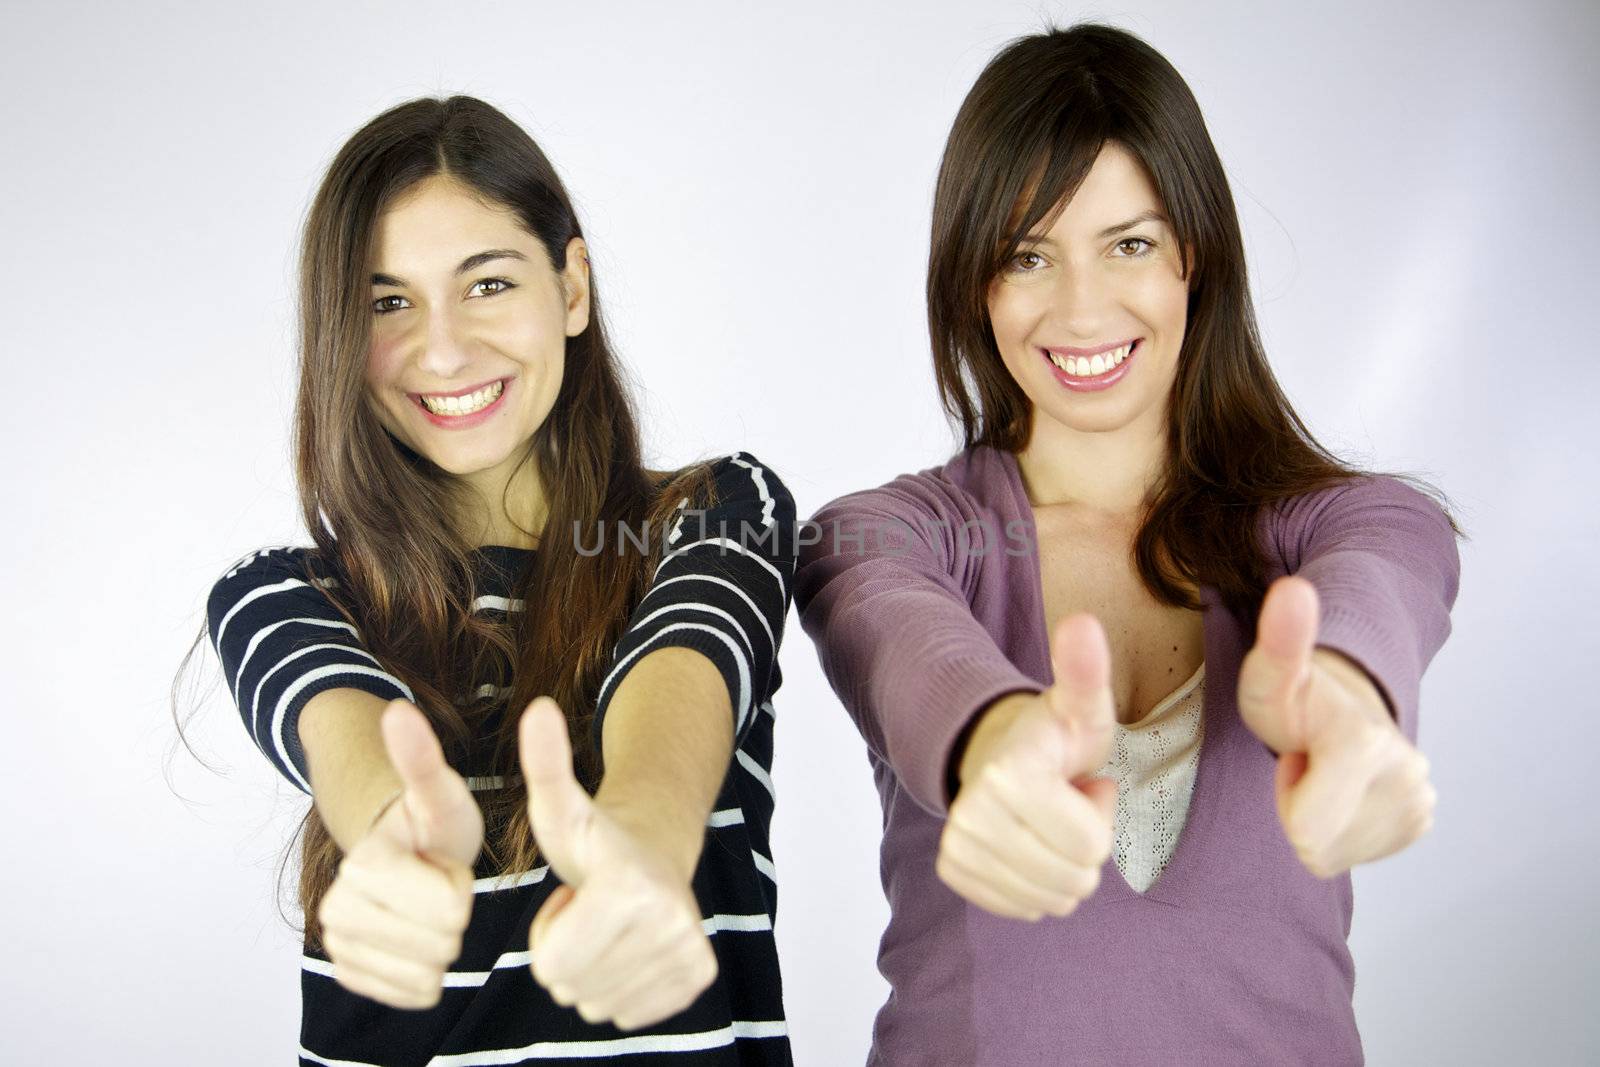 Two girls very happy with thumbs up smiling